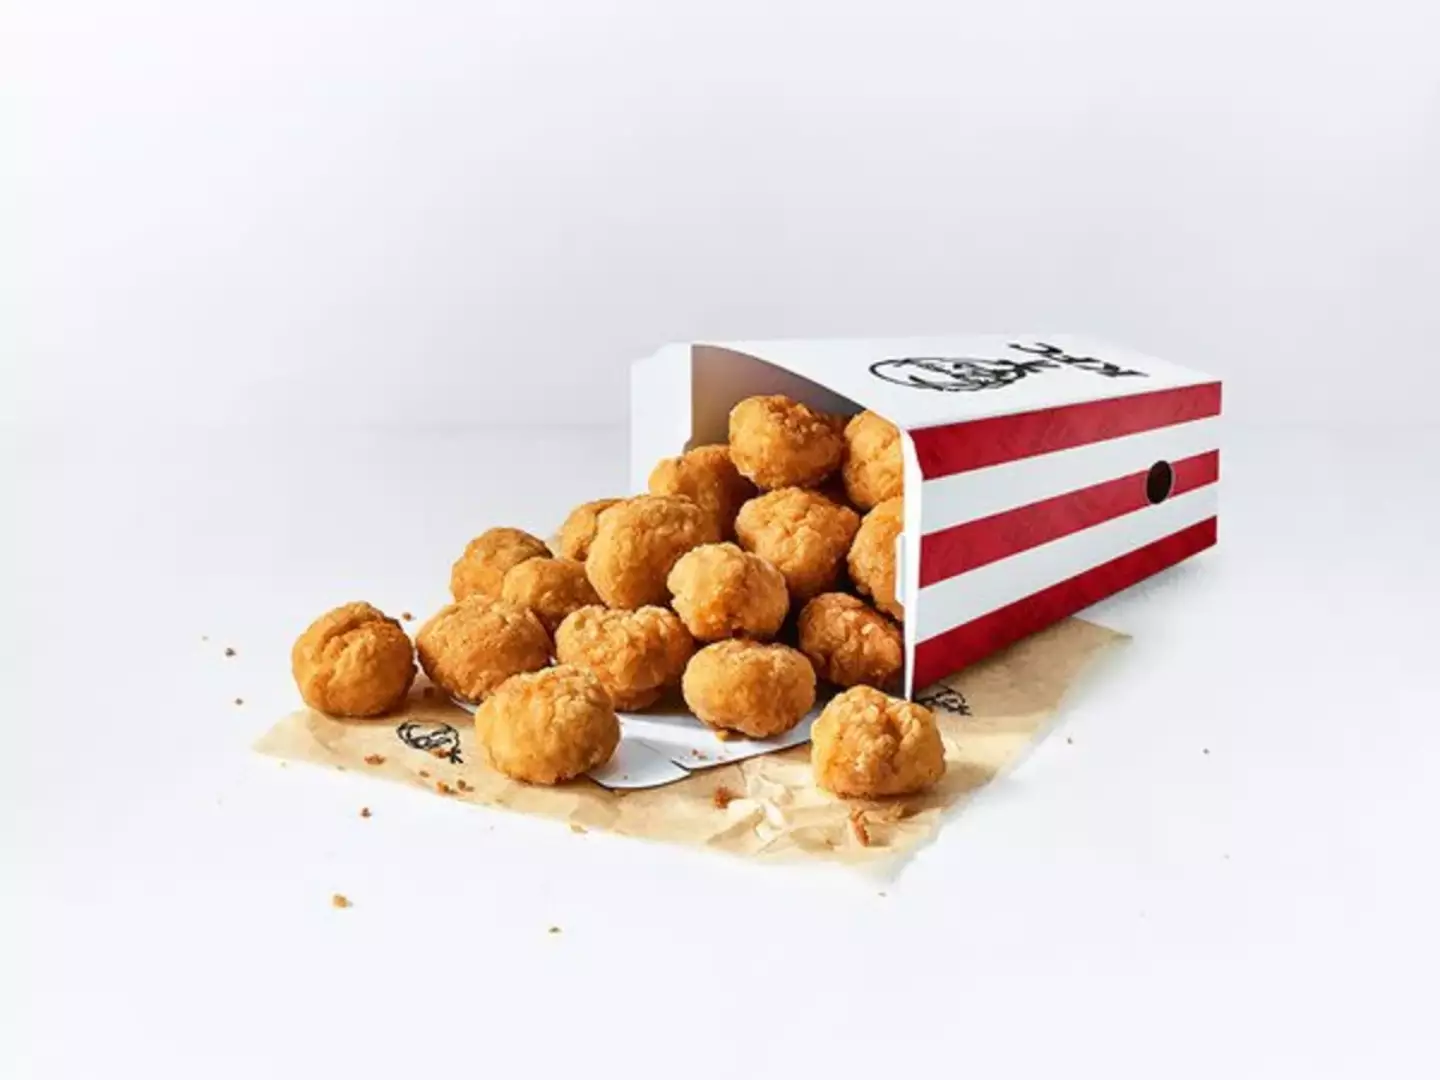 There's more than popcorn chicken in the Freebie Friday promotion.